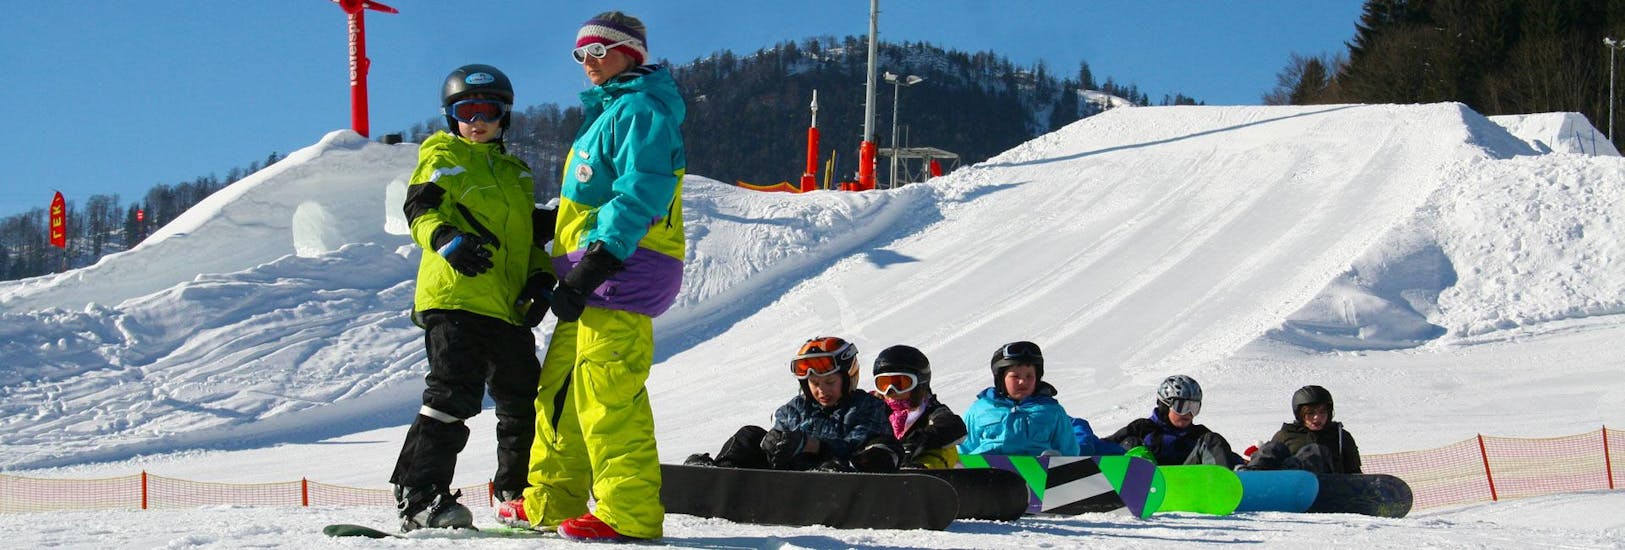 Some people are taking snowboarding lessons for beginners with ski school Ruhpolding at the Westernberg ski area.